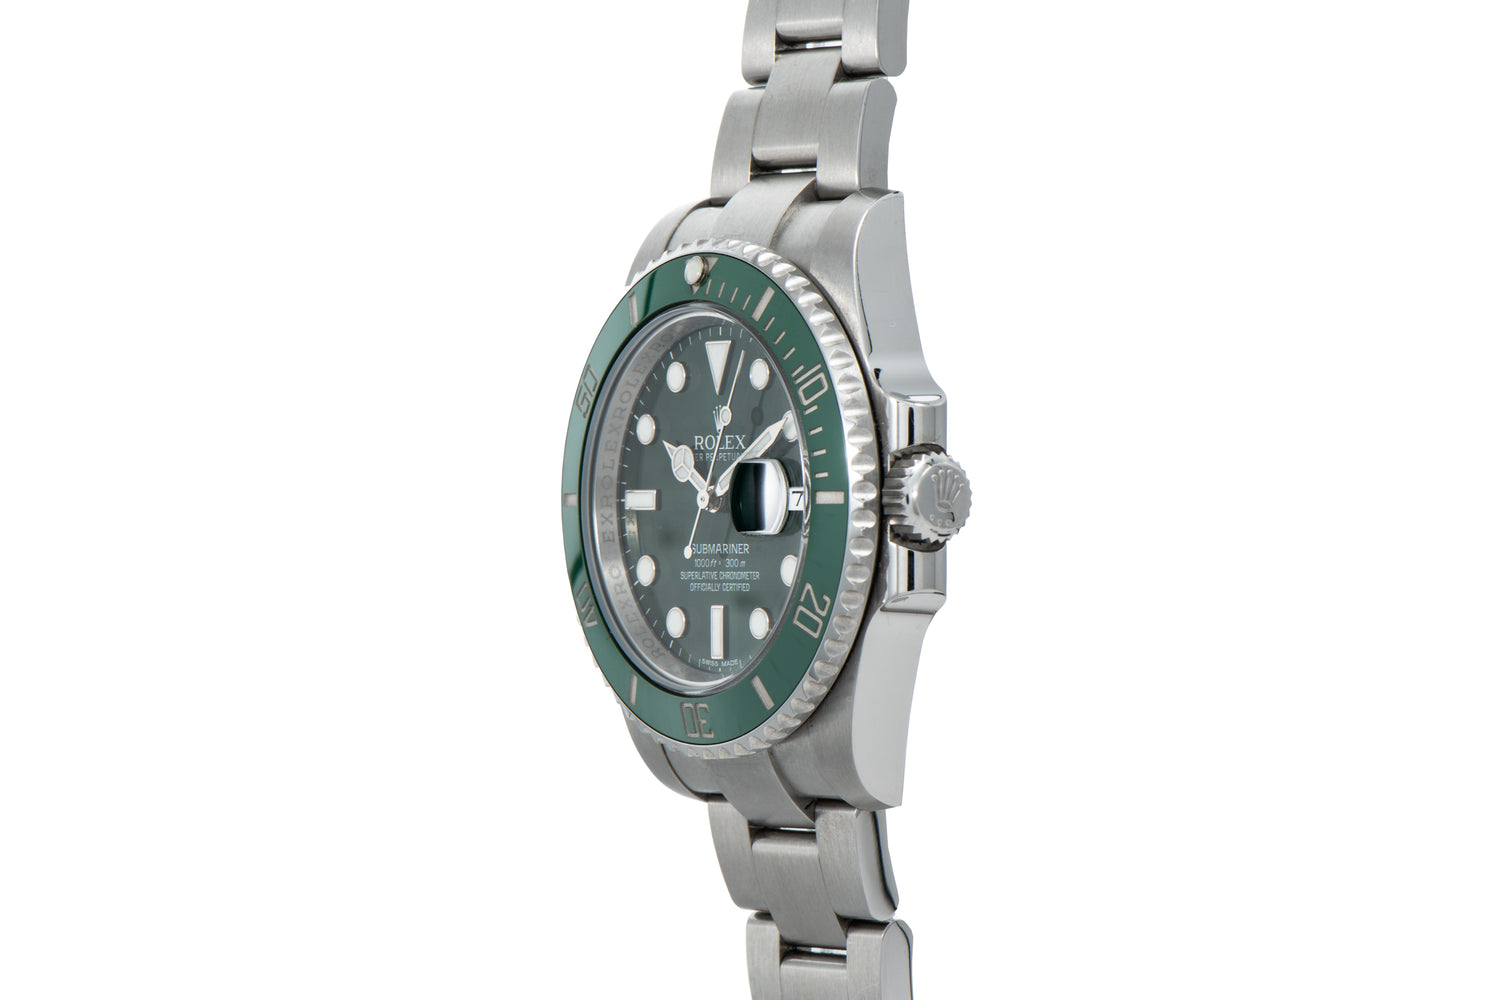 Rolex Submariner Date Hulk Ref. 116610LV for $20,750 for sale from